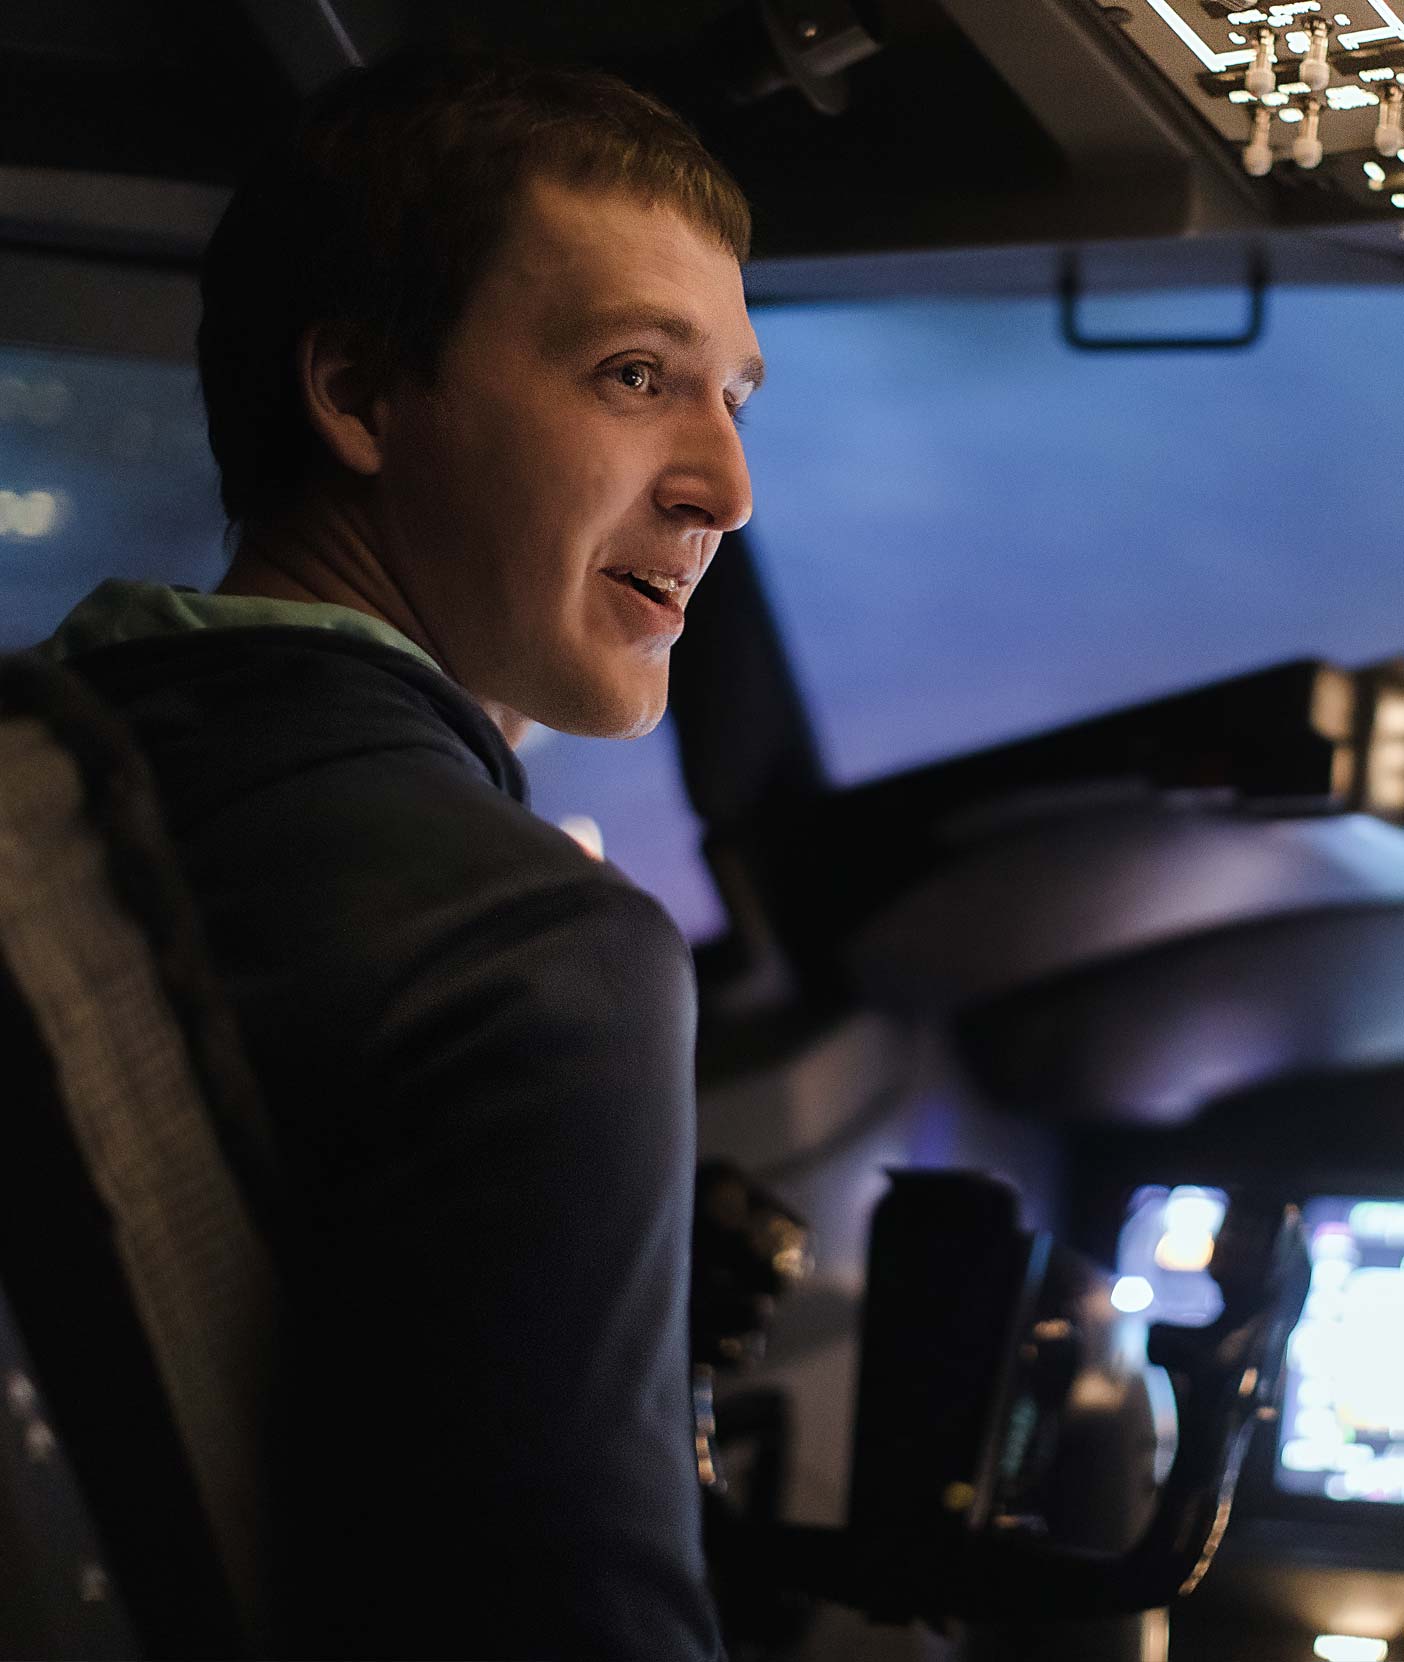 Young man smiles while using a flight simulator.